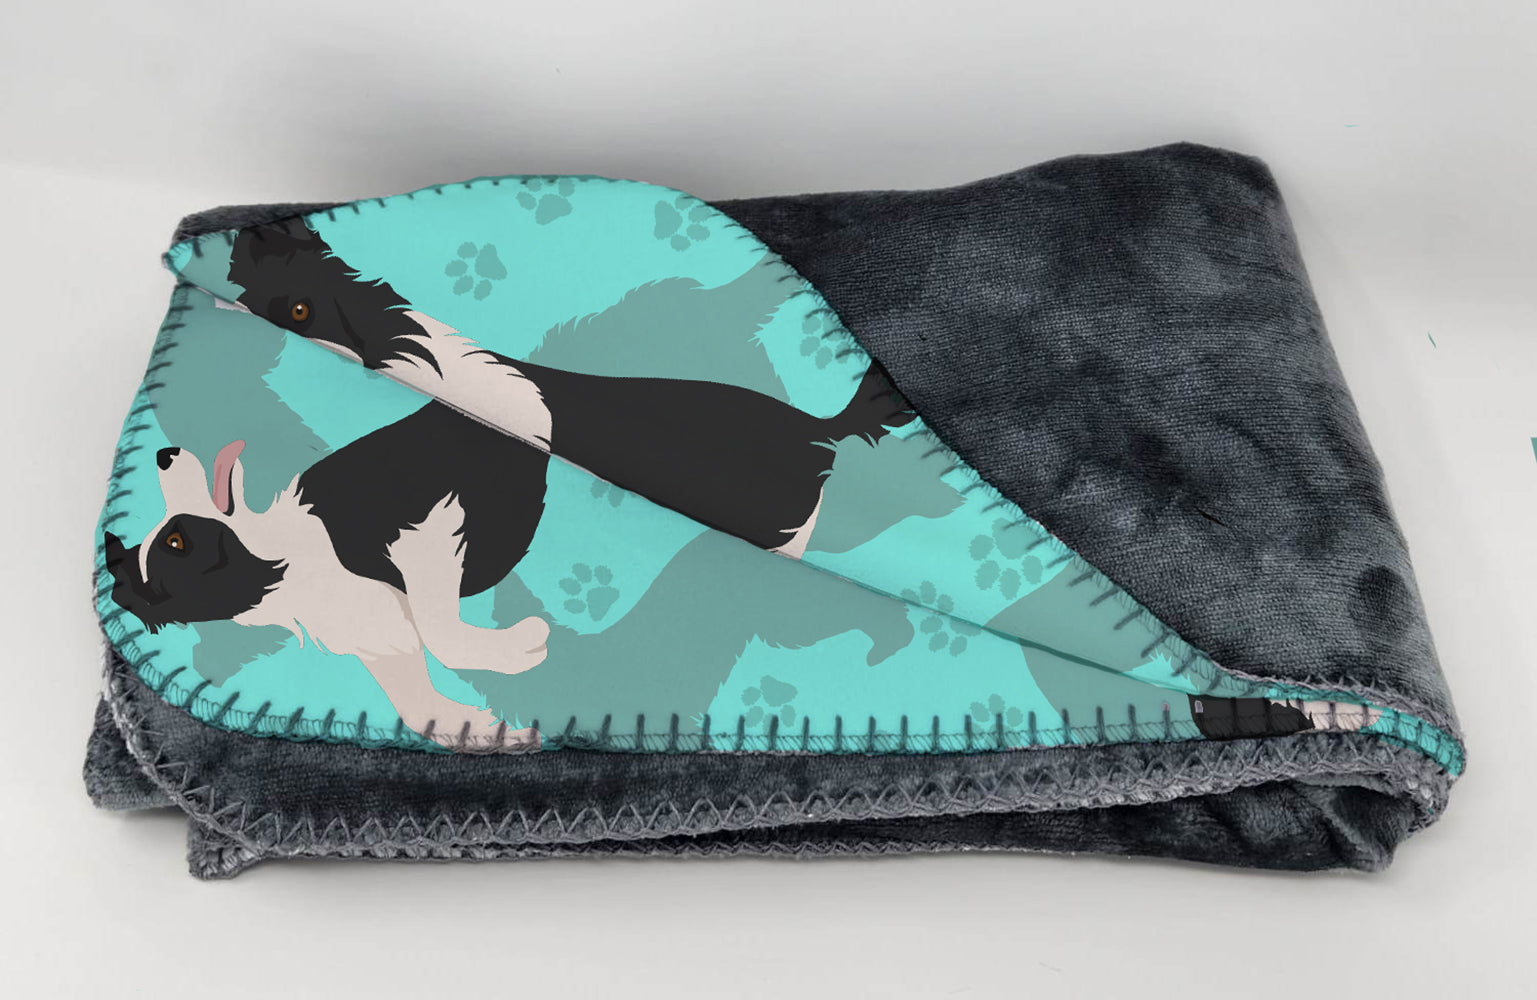 Buy this Border Collie Soft Travel Blanket with Bag